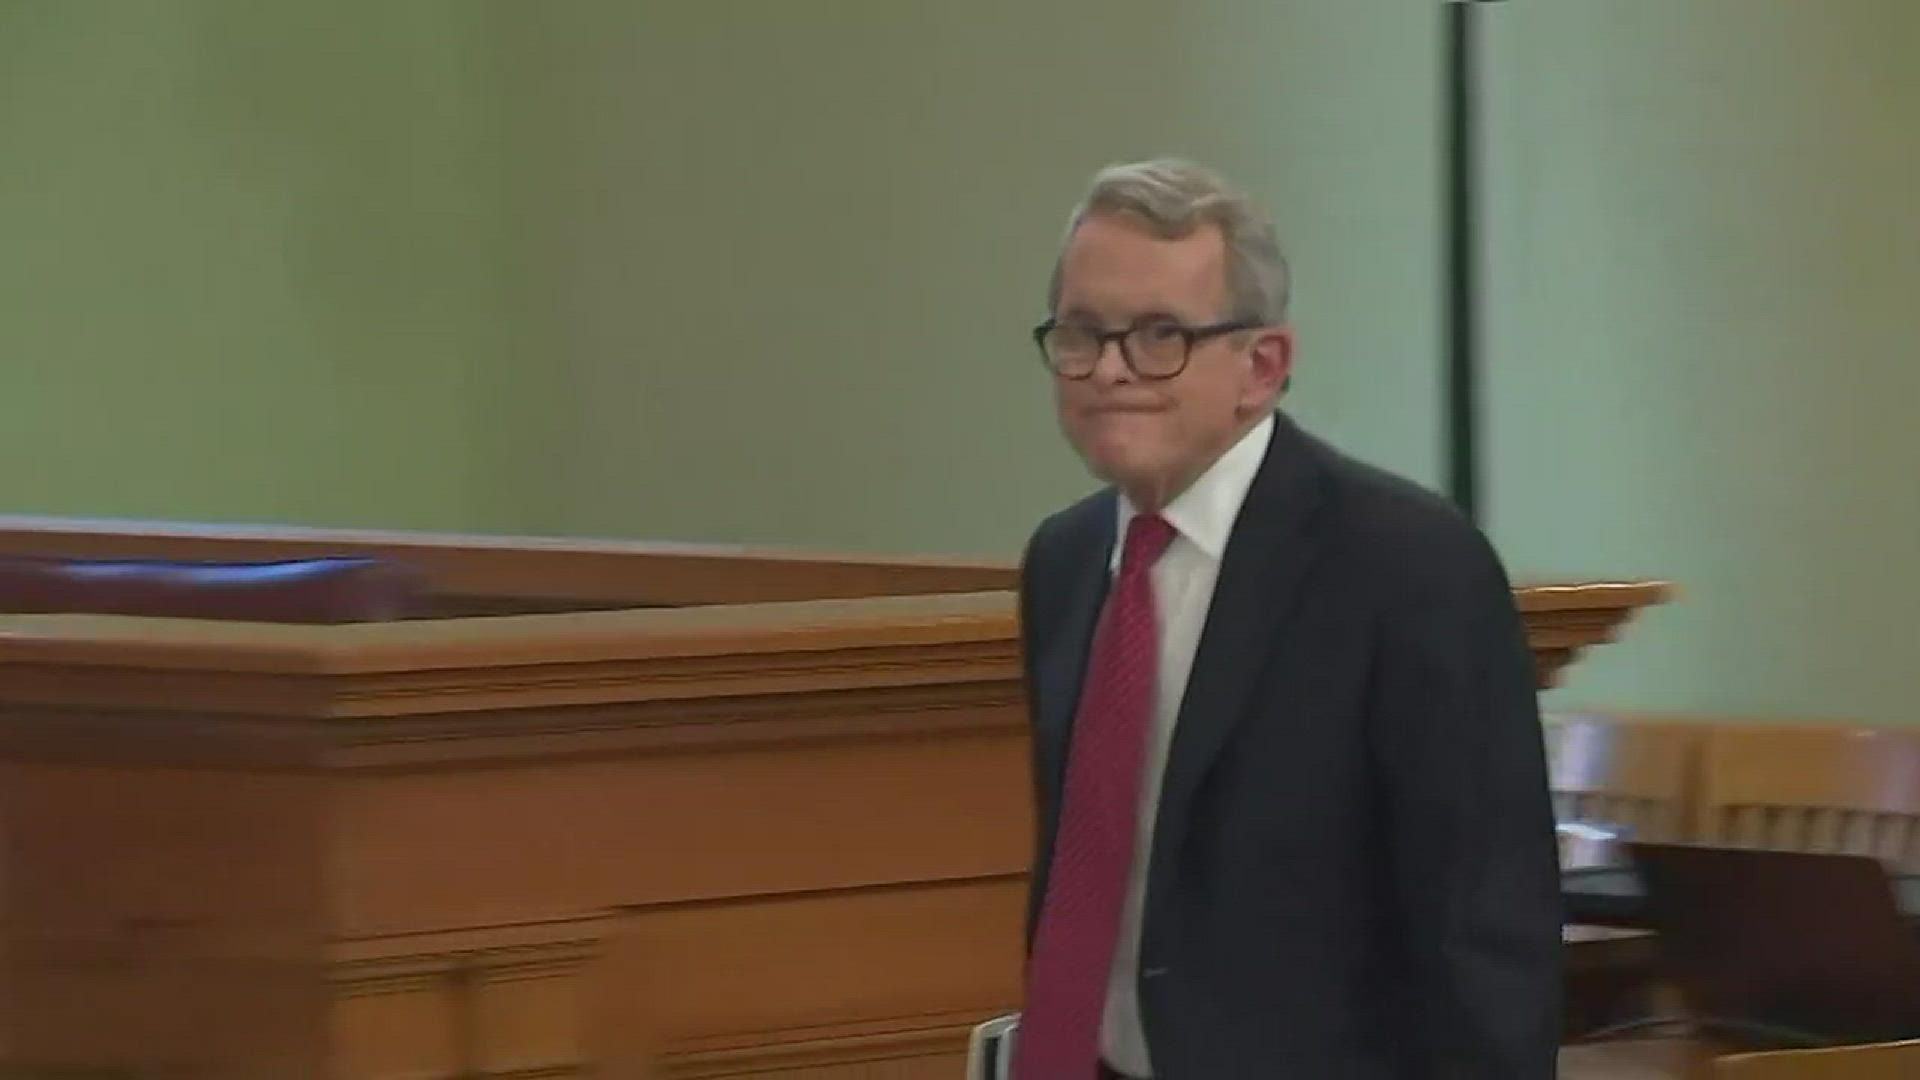 'This is a crisis and we need to get the job done,' Gov. Mike DeWine said.